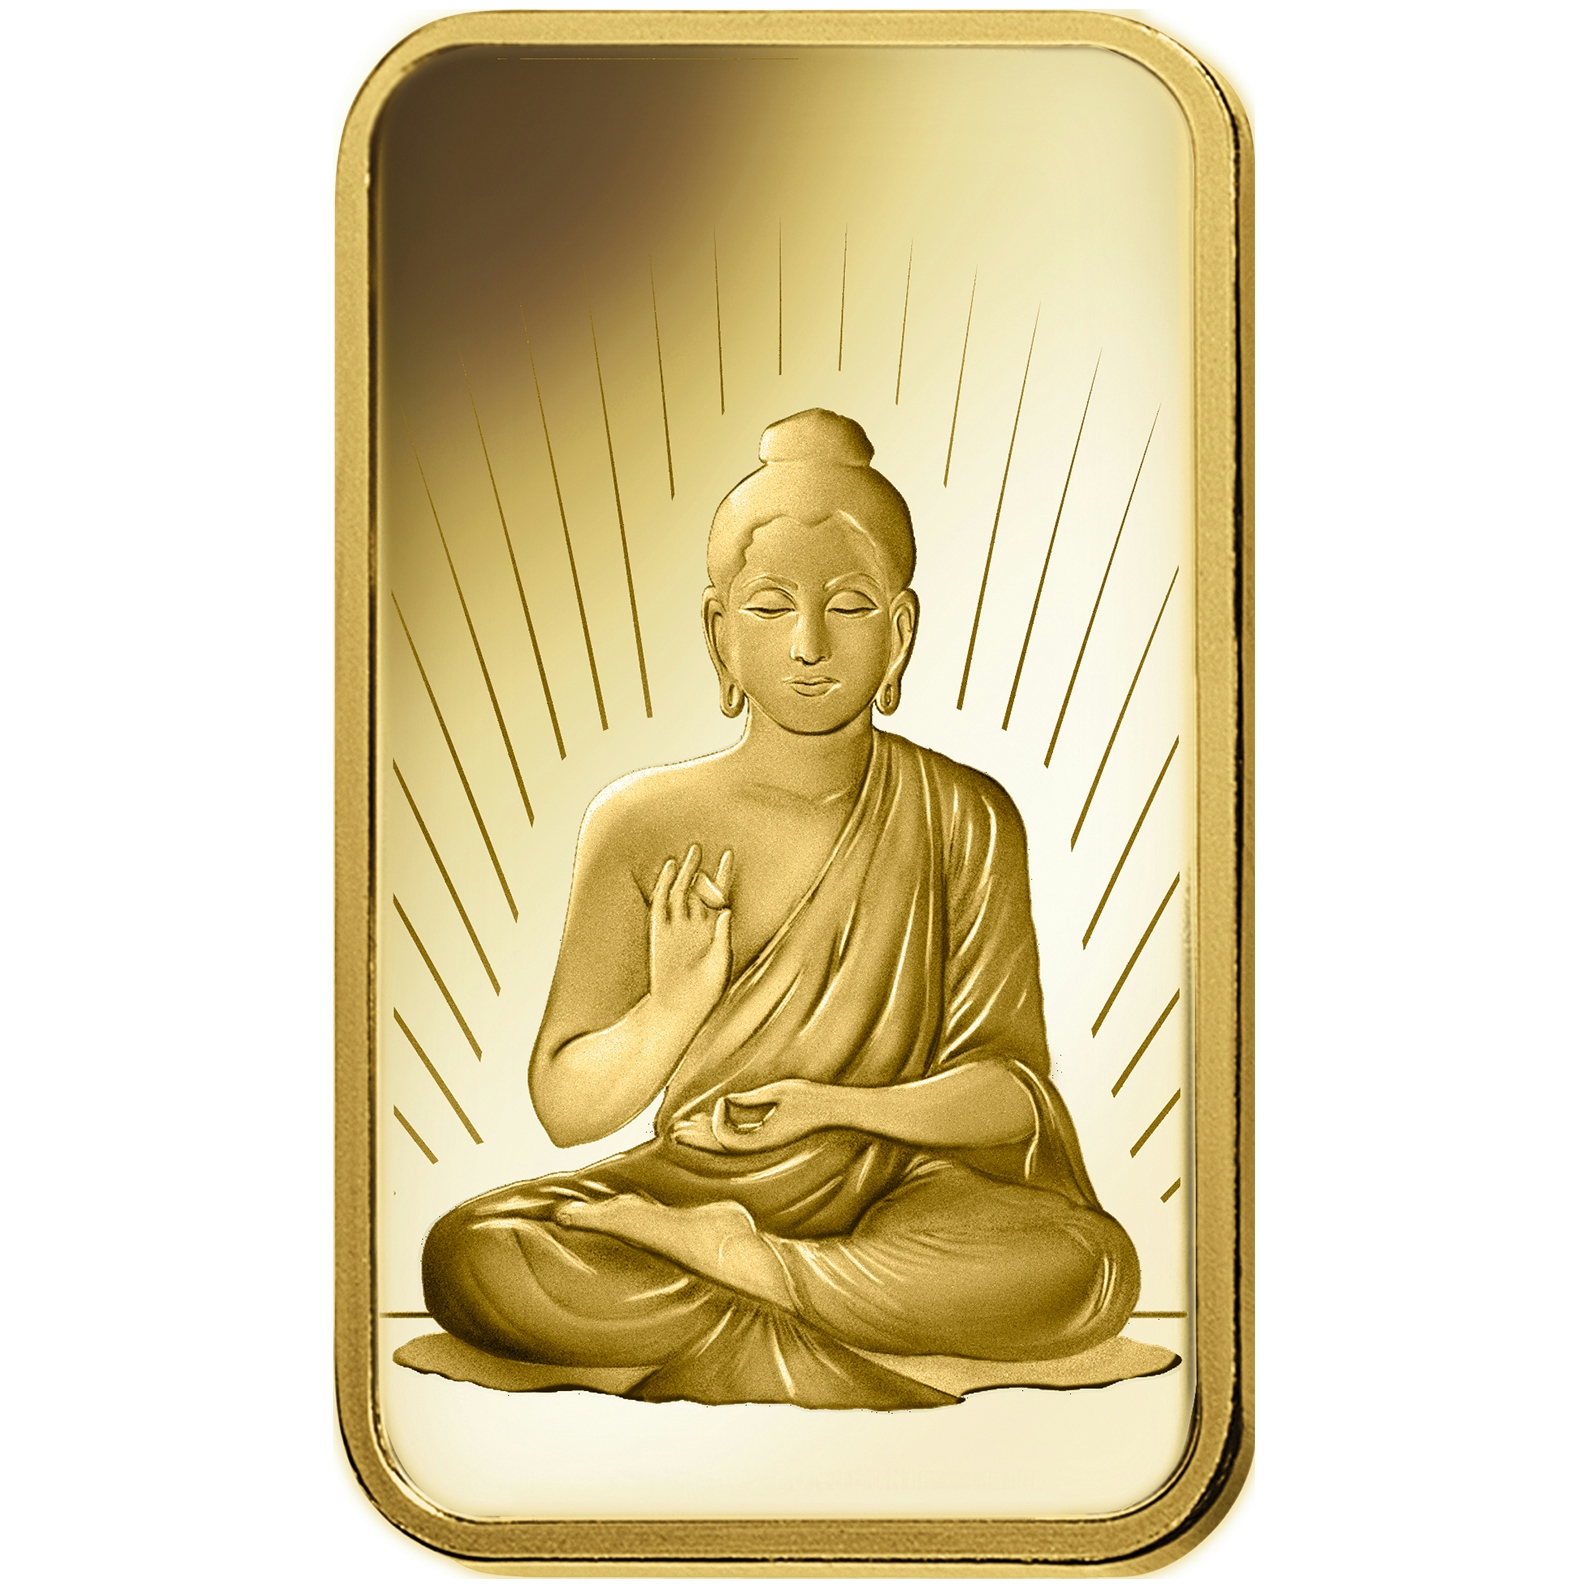 Achat d'or, 5 gram d'or pur Buddha - PAMP Suisse - Front 